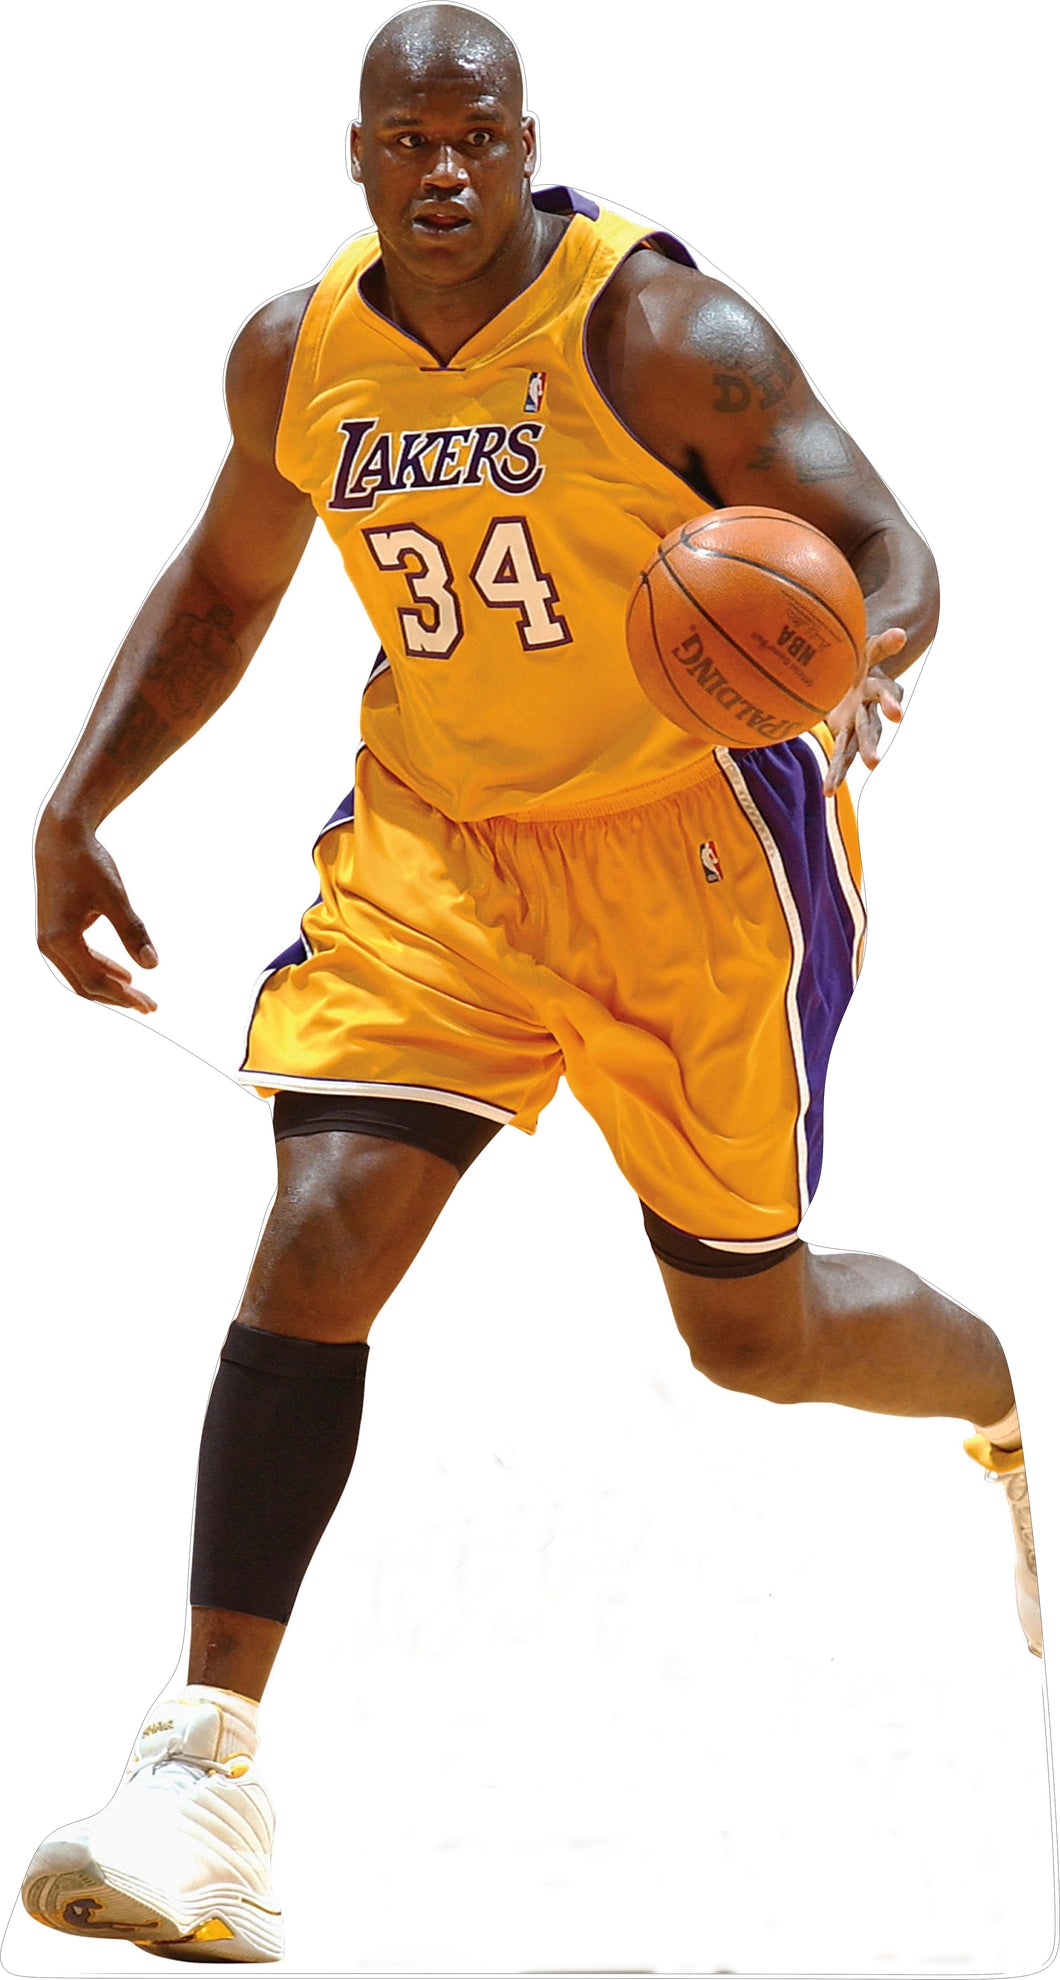 SHAQUILLE O'NEAL - #34 LAKERS -84